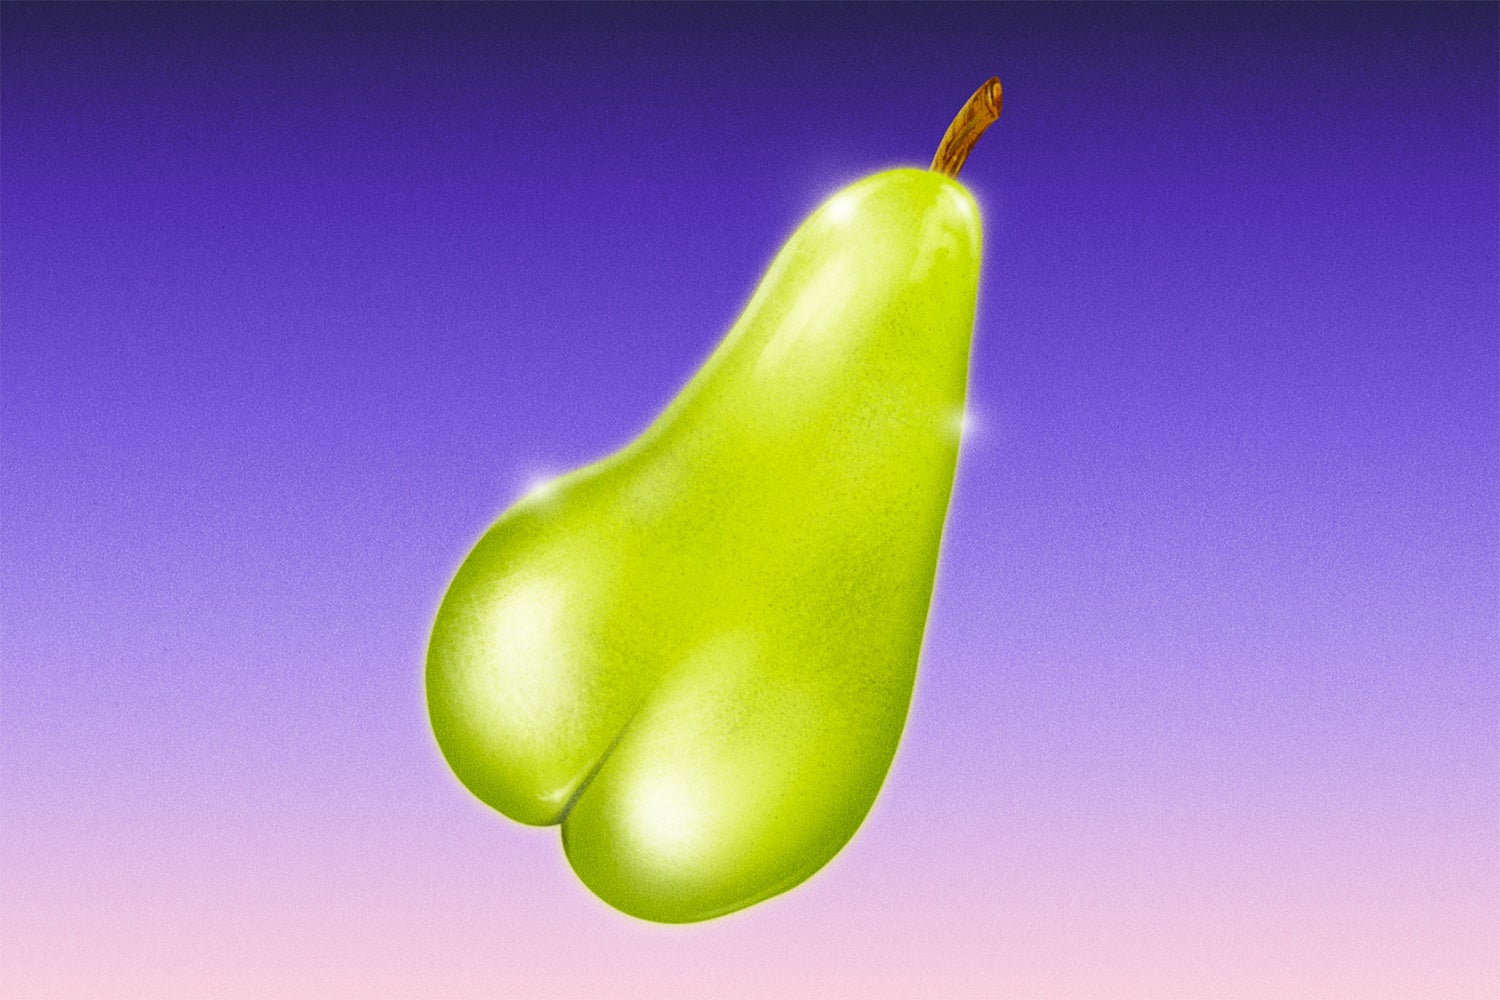 Green pear shaped like butt on purple and pink ombre background